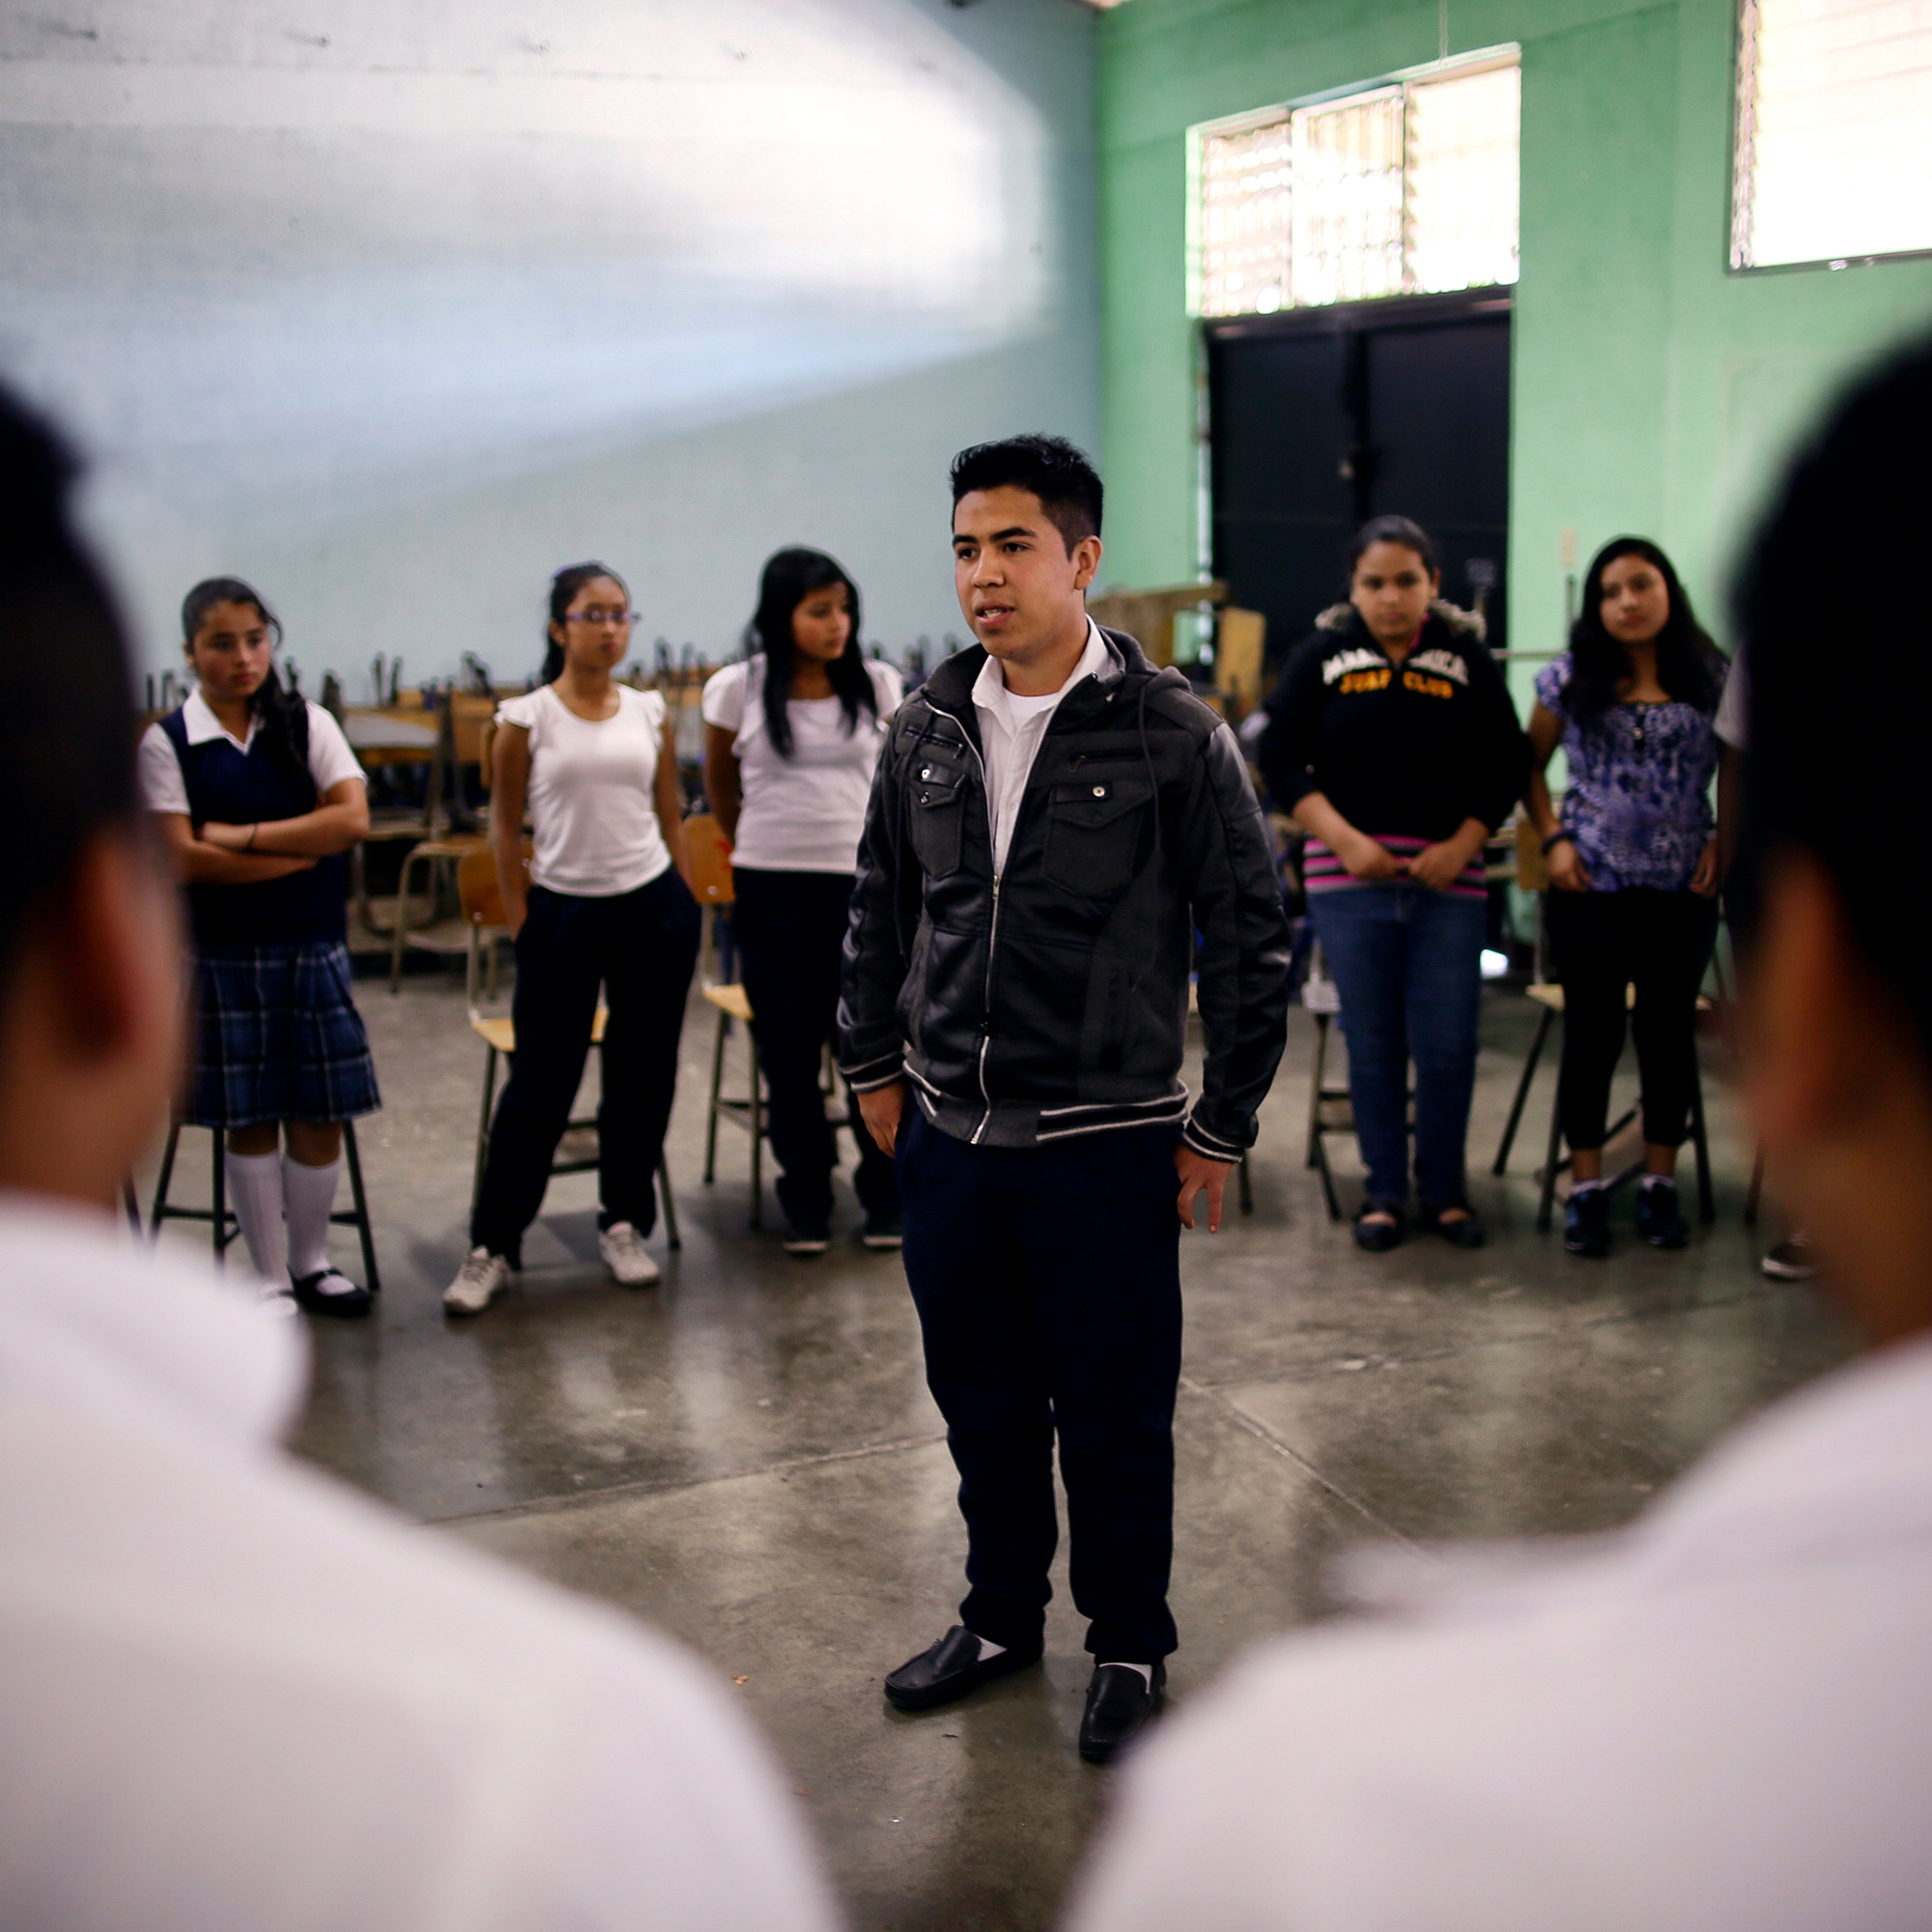 Students participate for the first time in a peace-building workshop at the Instituto Maya, Zone 18, Guatemala City, Guatemala. Photo credit: Save the Children